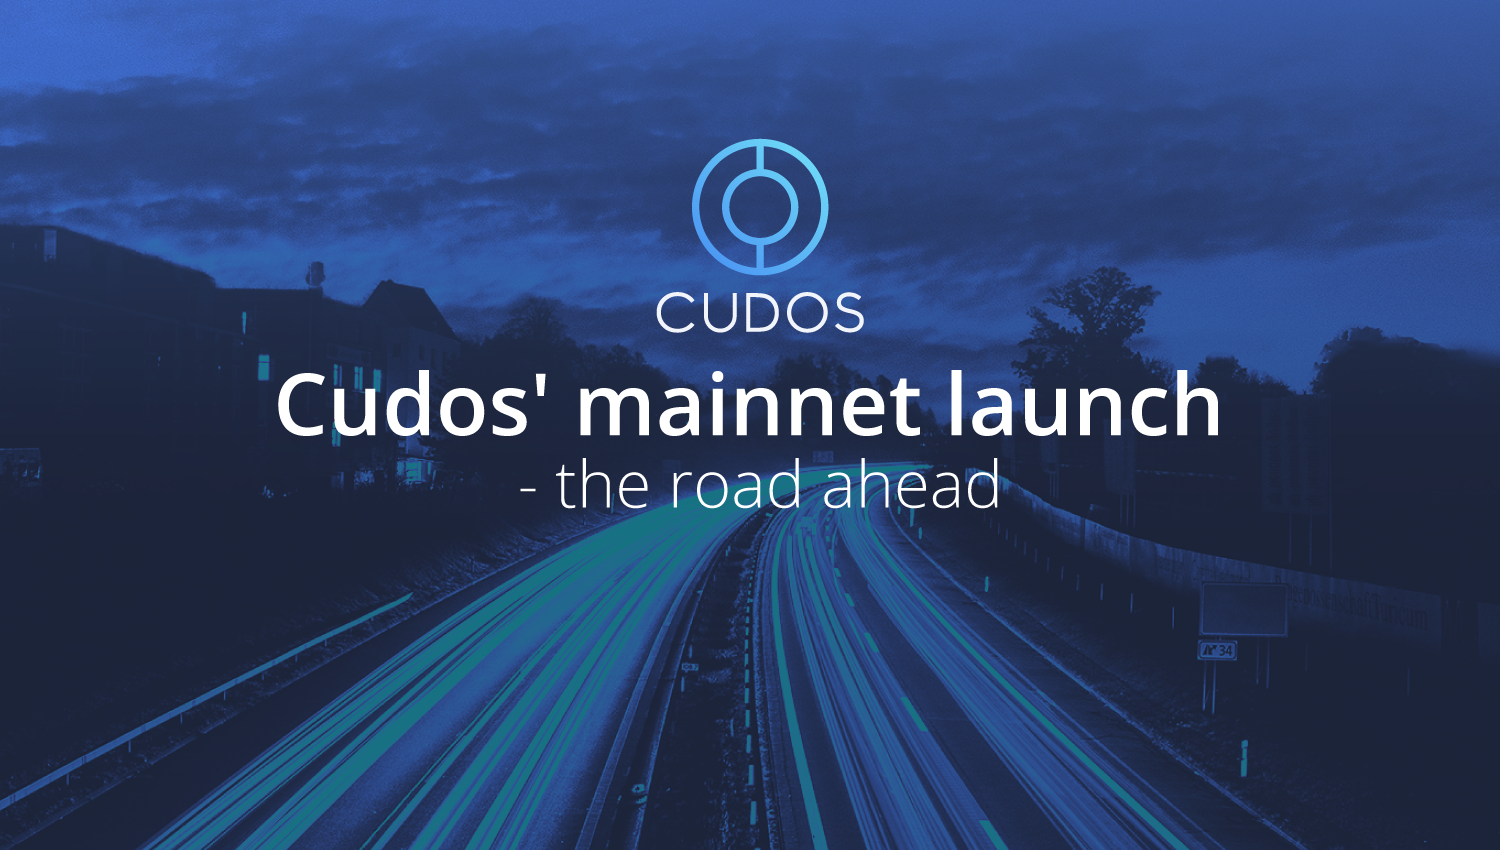 Global Computer Network Launches New Mainnet “Cudos” Offering Cloud Services